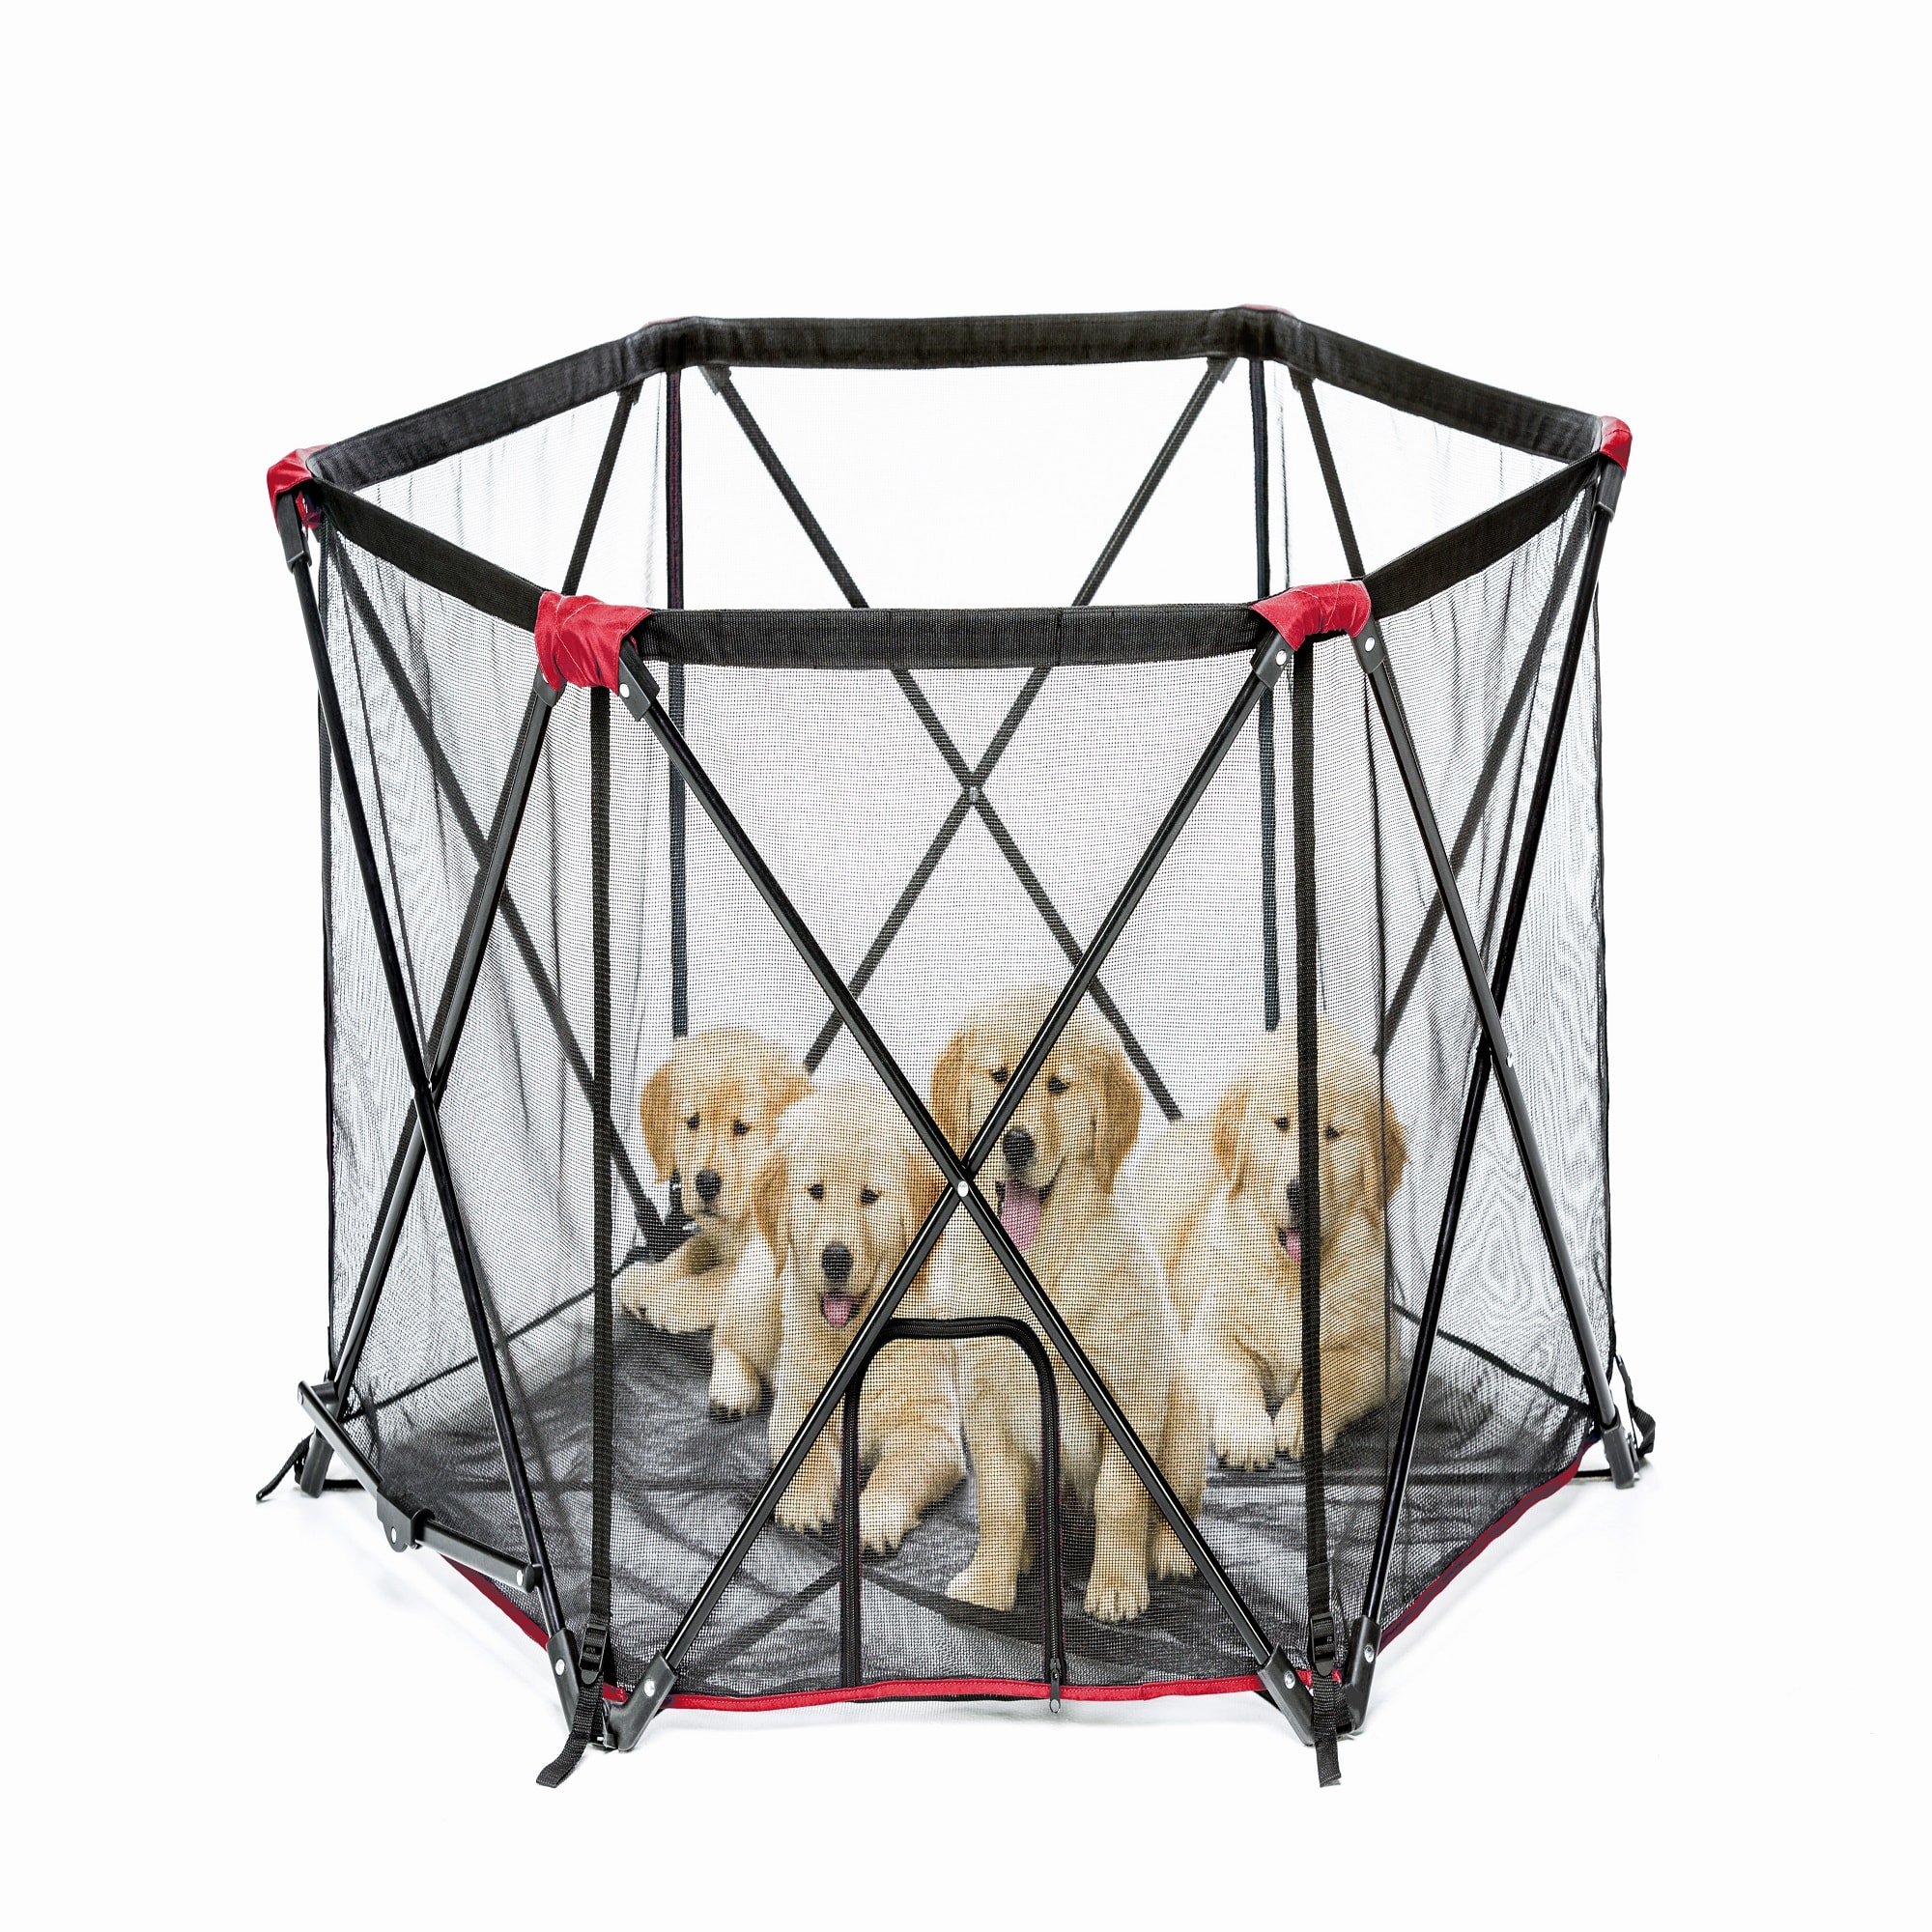 carlson pet pen with canopy